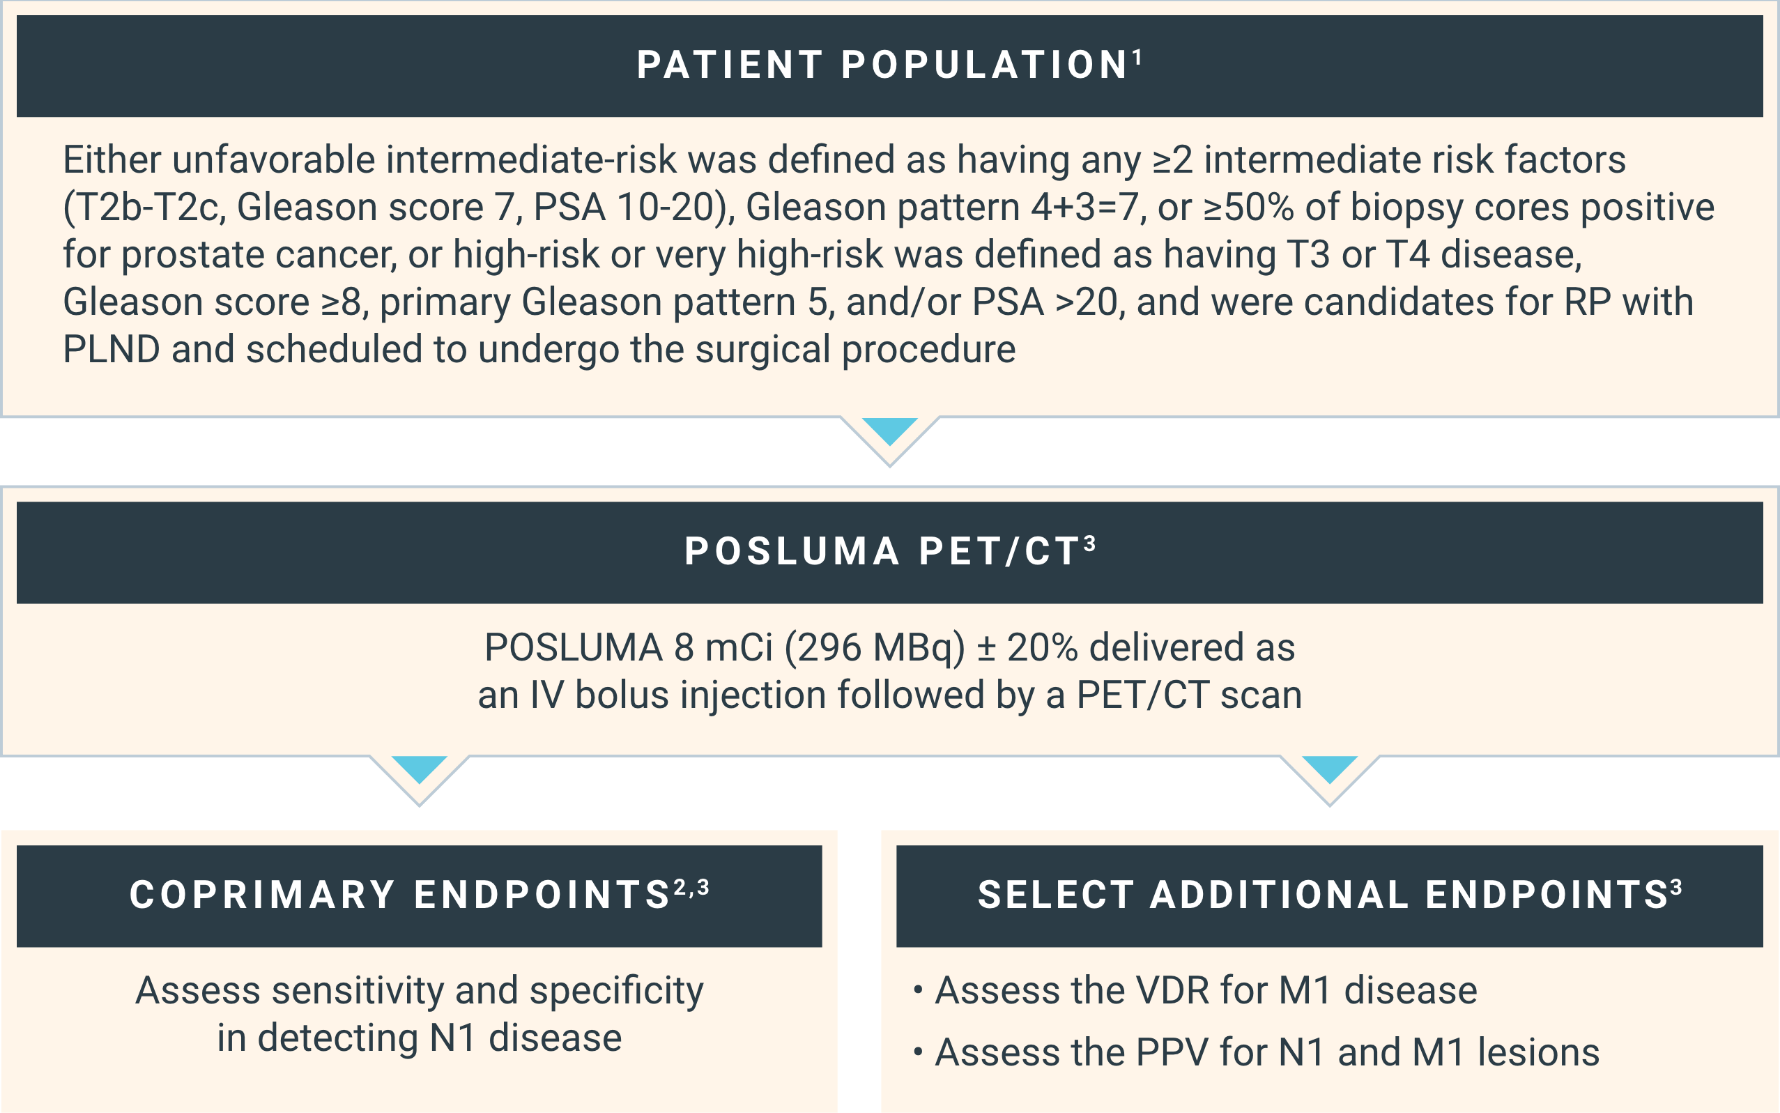 Chart describing the patient population for the SPOTLIGHT study, as well as explaining the POSLUMA PET/CT scans and listing the coprimary endpoints and select additional endpoints